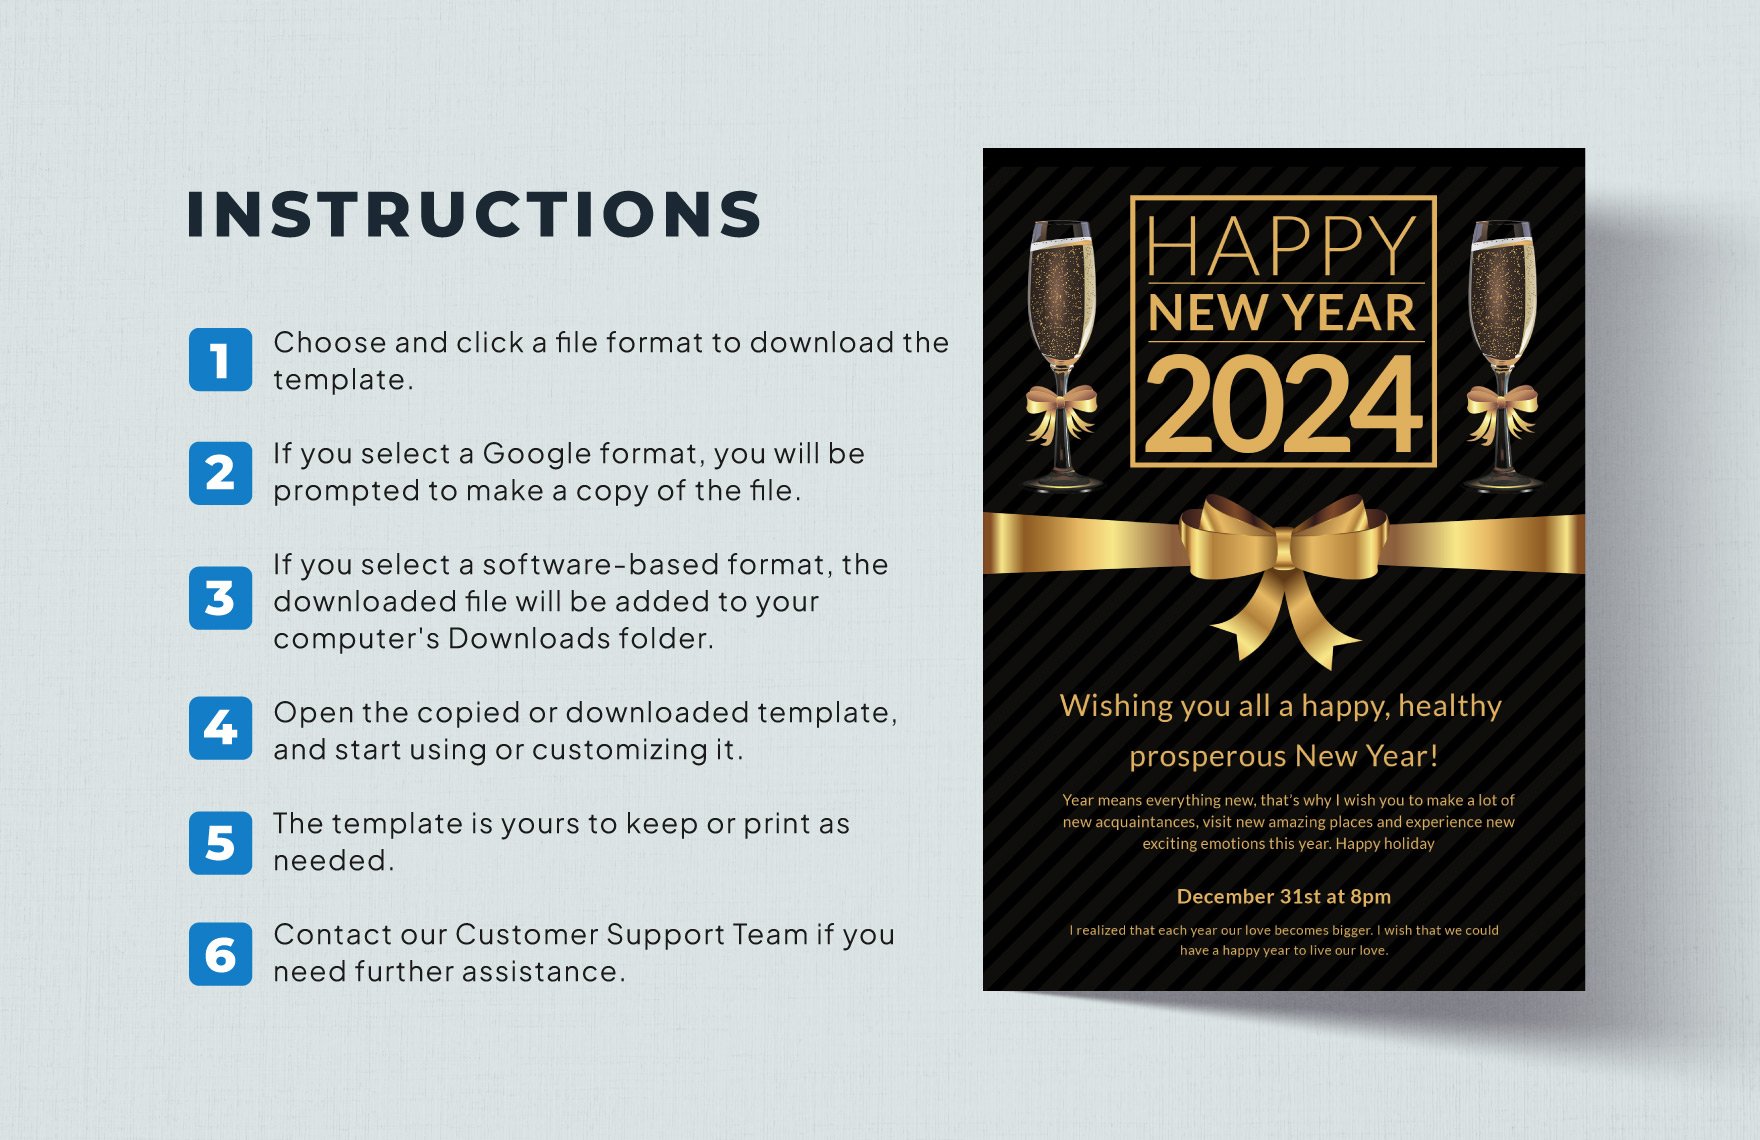 New Year Party Invitation Template